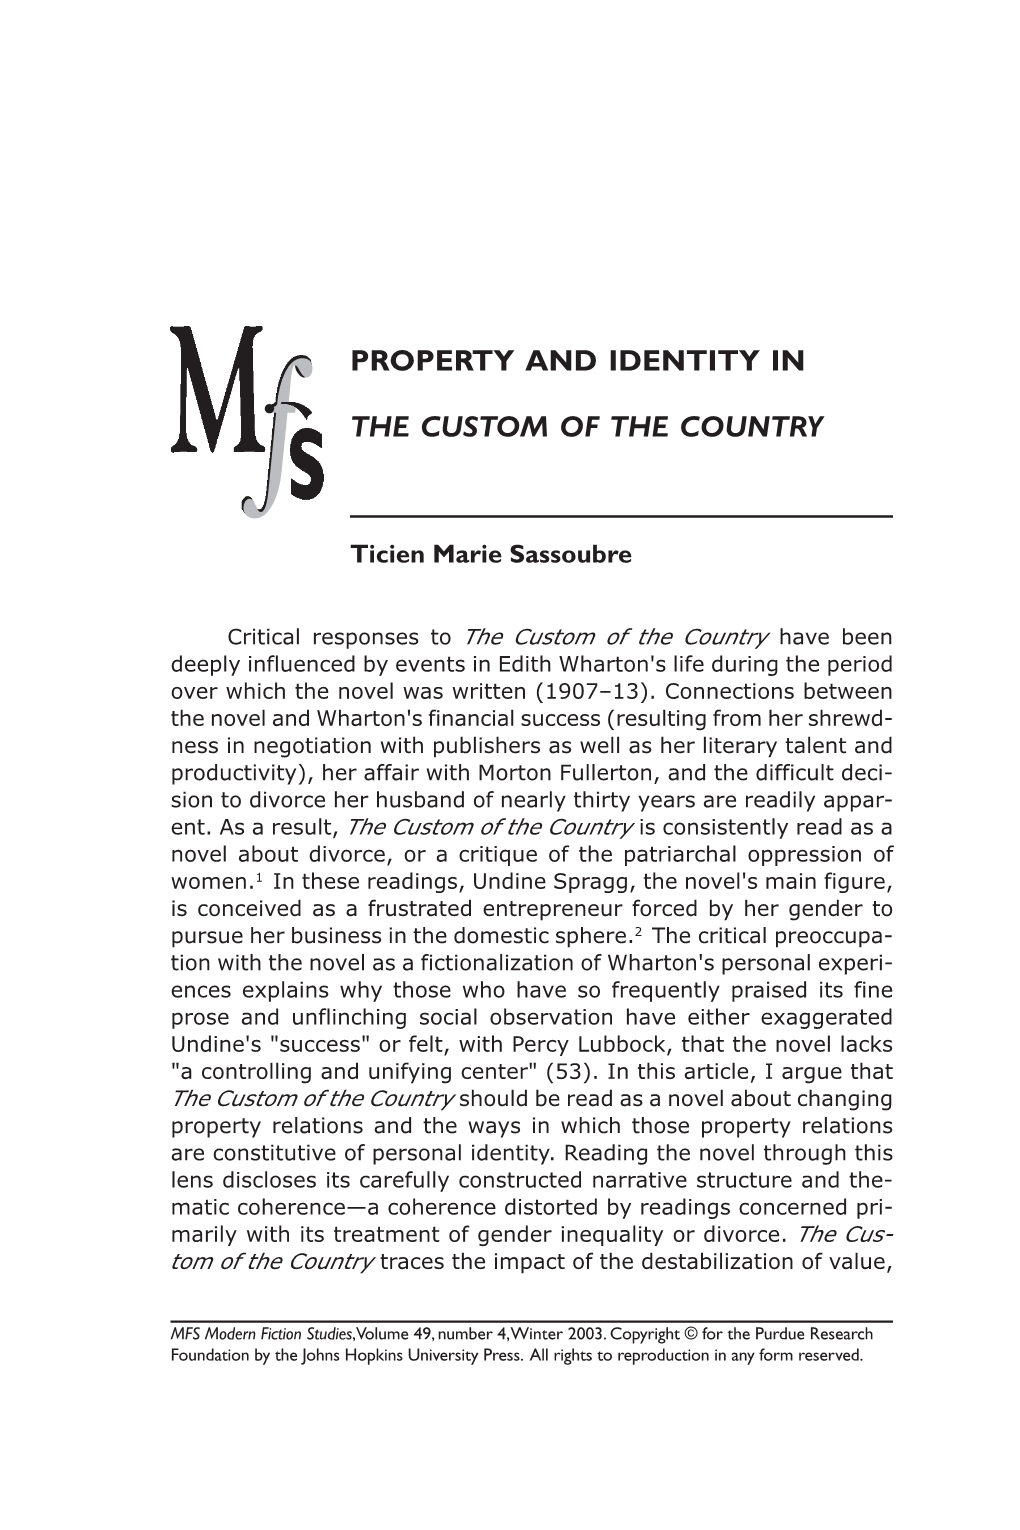 Property and Identity in the Custom of the Country and Ultimately Meaning, on Personal Identity As Volatile Economic Conditions Erode Familiar Social Structures